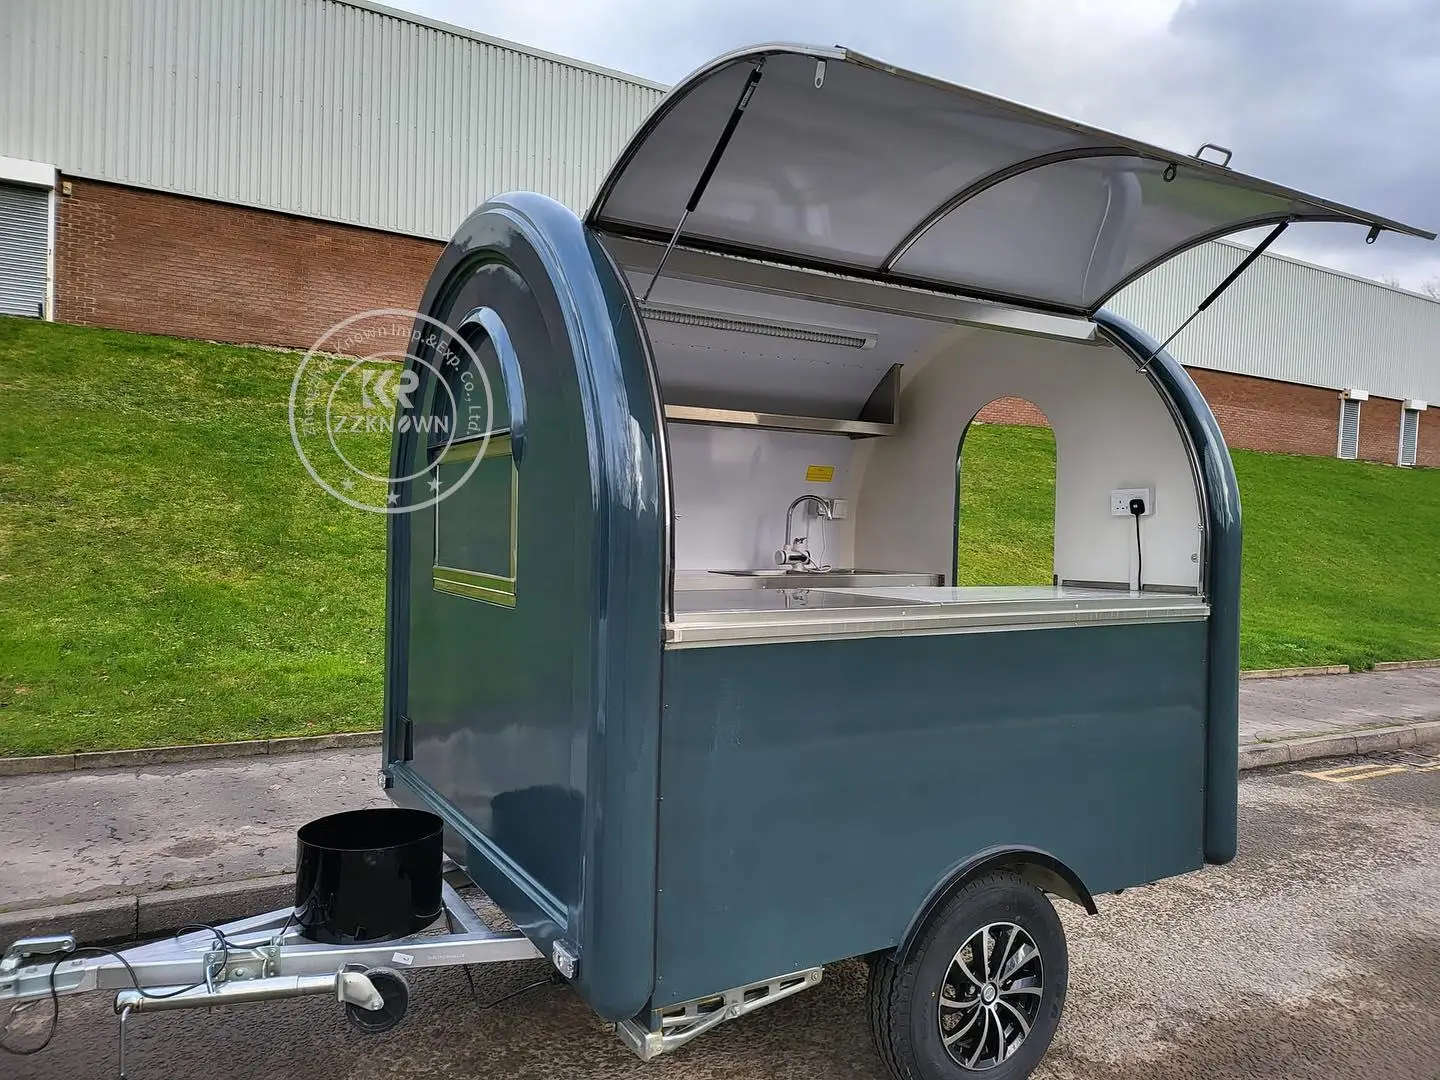 Mobile Food Truck With Full Kitchen Concession Food Trailer Hot Dog Ice Cream Cart With Full Kitchen Us Standards DOT Pizza